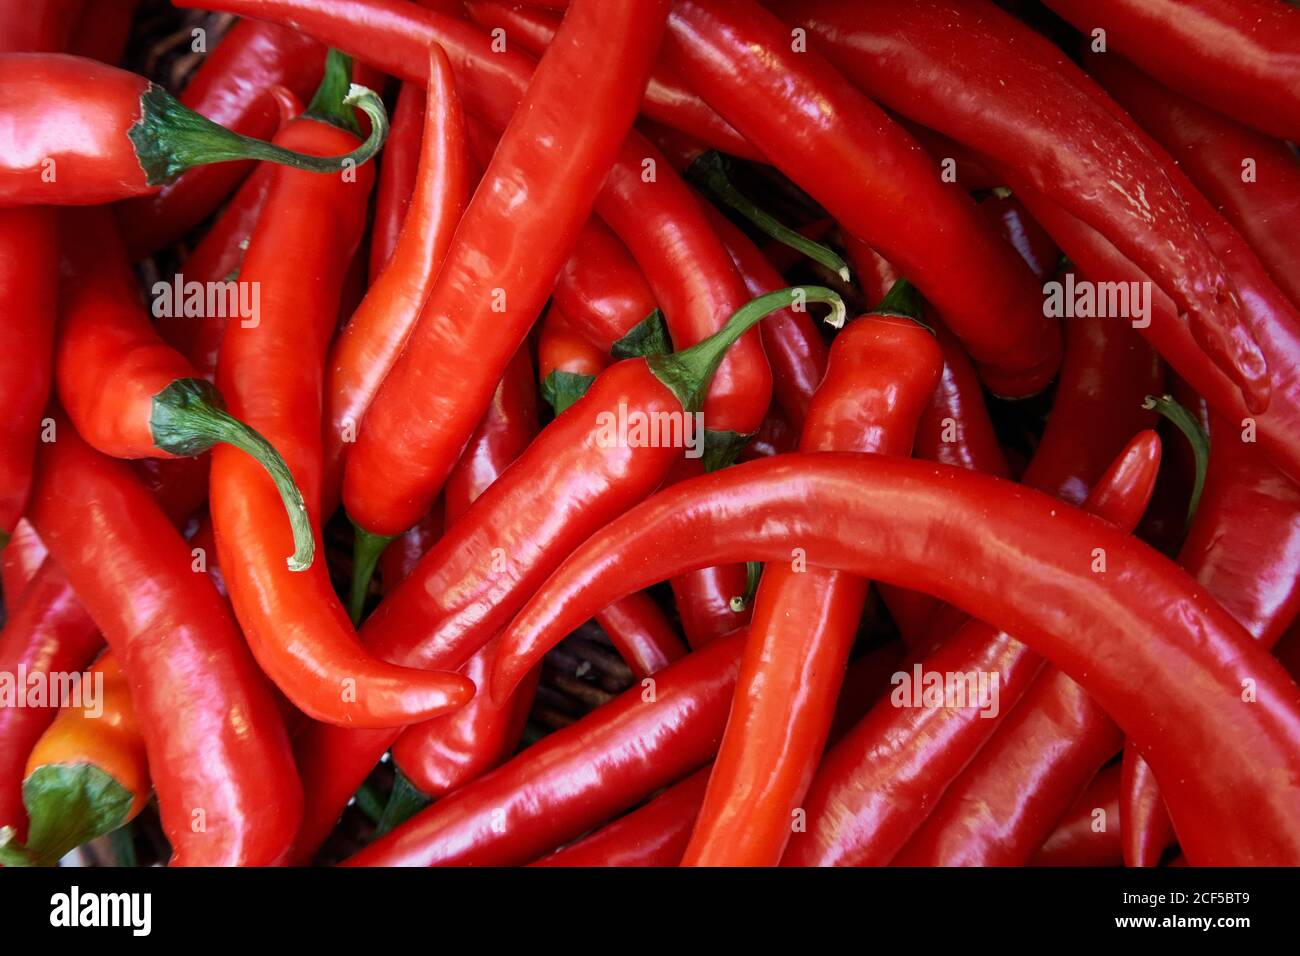 Top view of fresh red hot chili peppers placed in pile on market Stock  Photo - Alamy